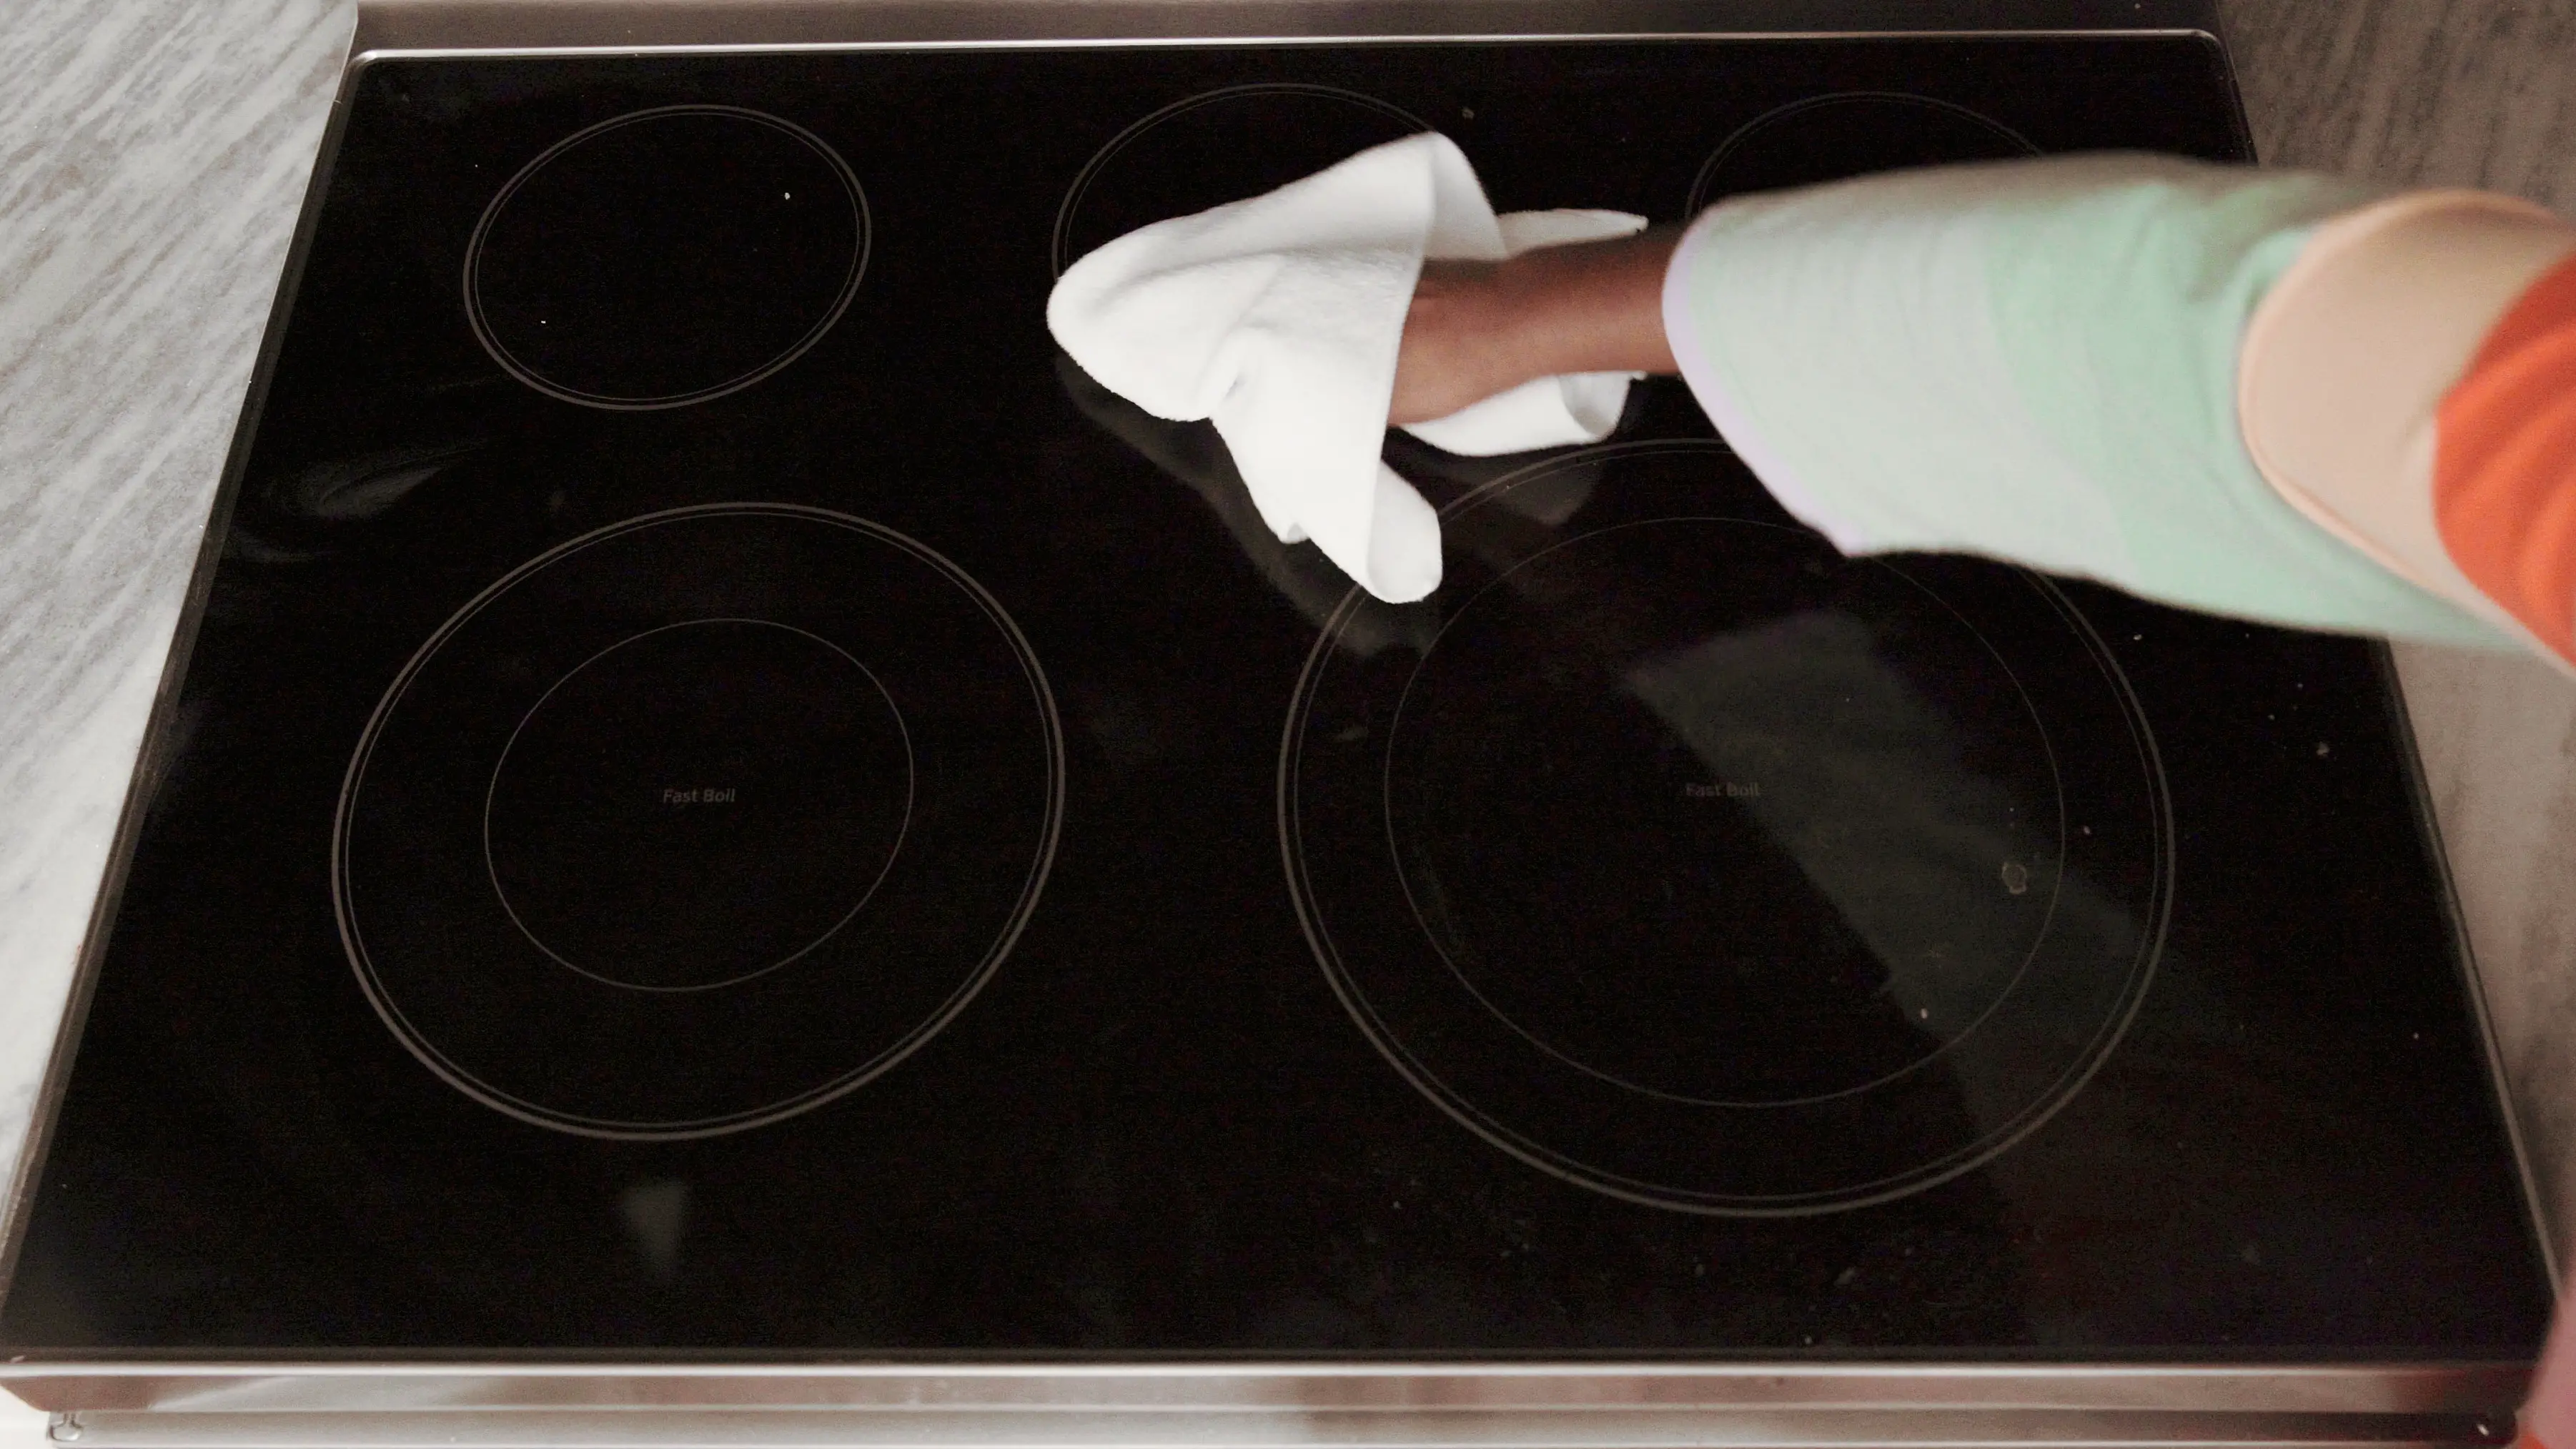 How to clean a glass stove top?